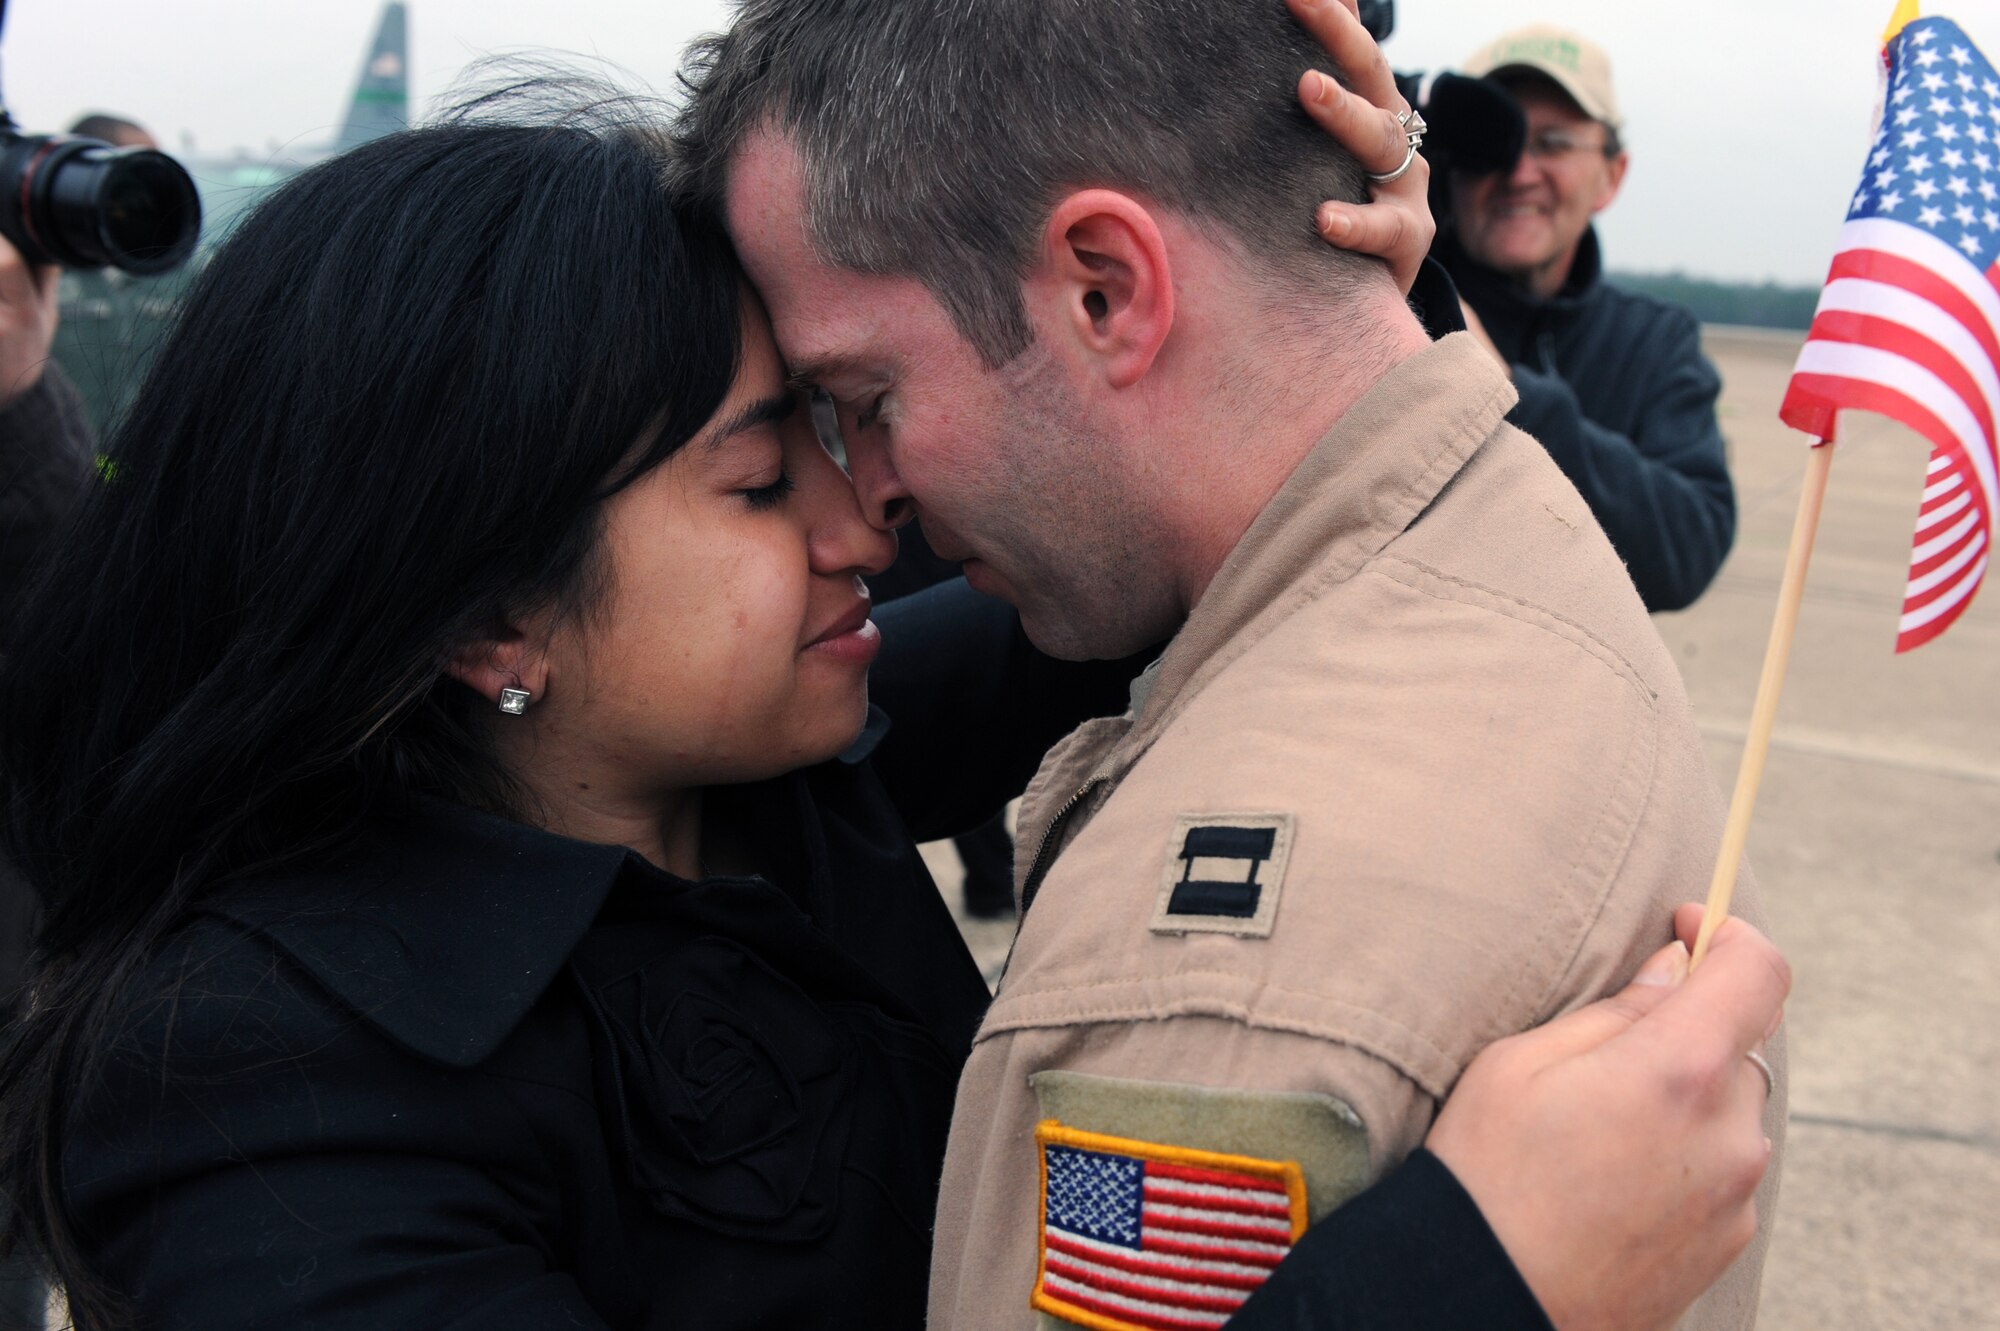 Capt. Evan Zangerle, a 50th Airlift Squadron navigator, embraces his wife Dawn after returning from a deployment Dec. 23, 2011, at Little Rock Air Force Base, Ark. Zangerle returned with more than 80 other Airmen, just in time for the holidays, after supporting combat operations in Southwest Asia. (U.S. Air Force photo by Airman 1st Class Rusty Frank) 